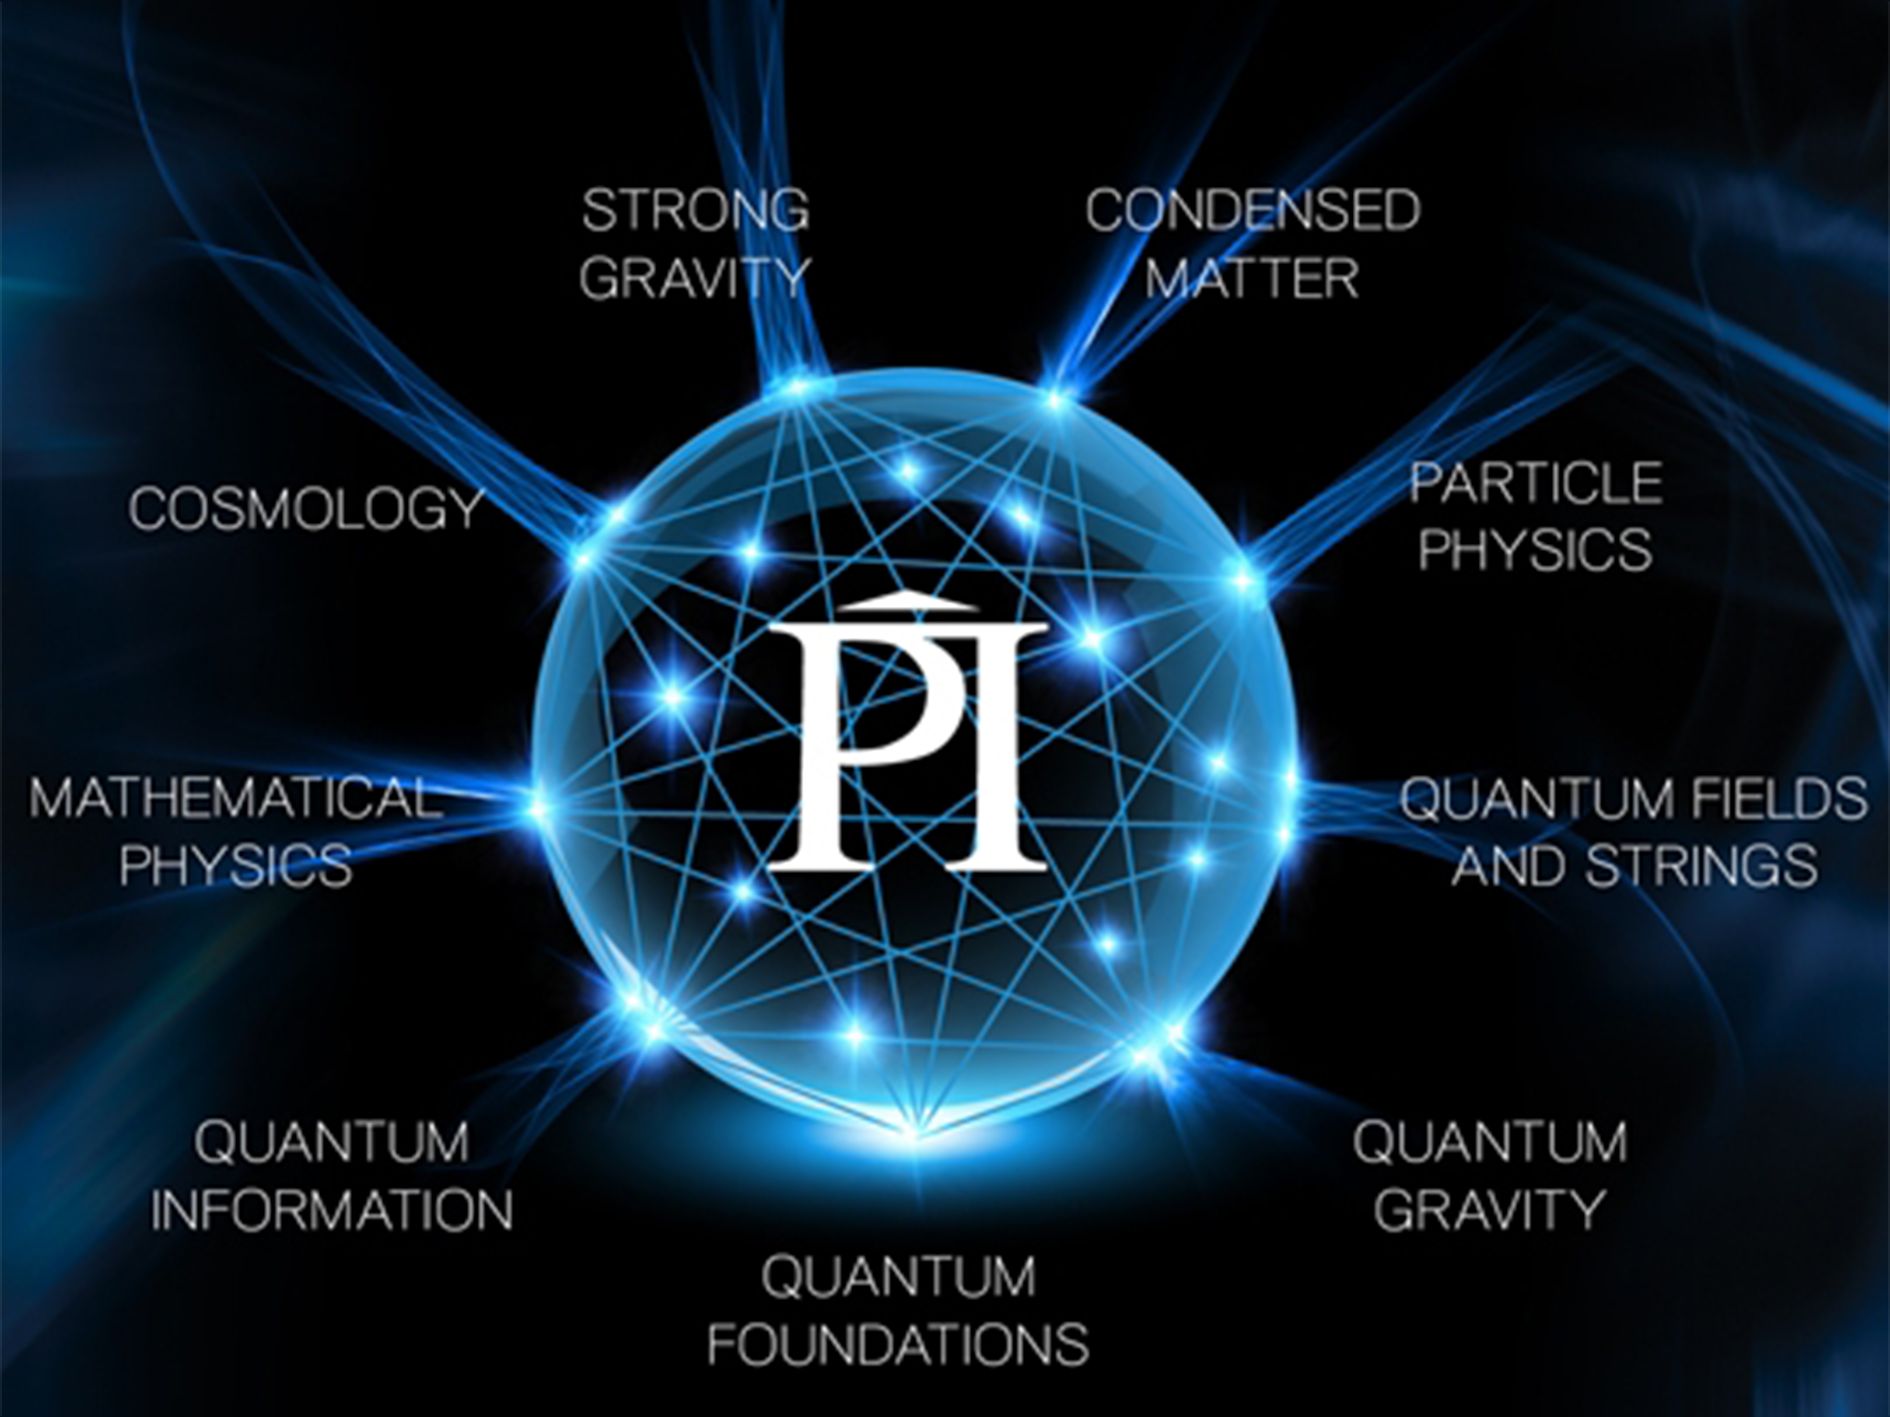 Graphic showing Perimeter Institute's 9 research areas: strong gravity, condensed matter, particle physics, quantum fields and strings, quantum gravity, quantum foundations, quantum information, mathematical physics, cosmology.